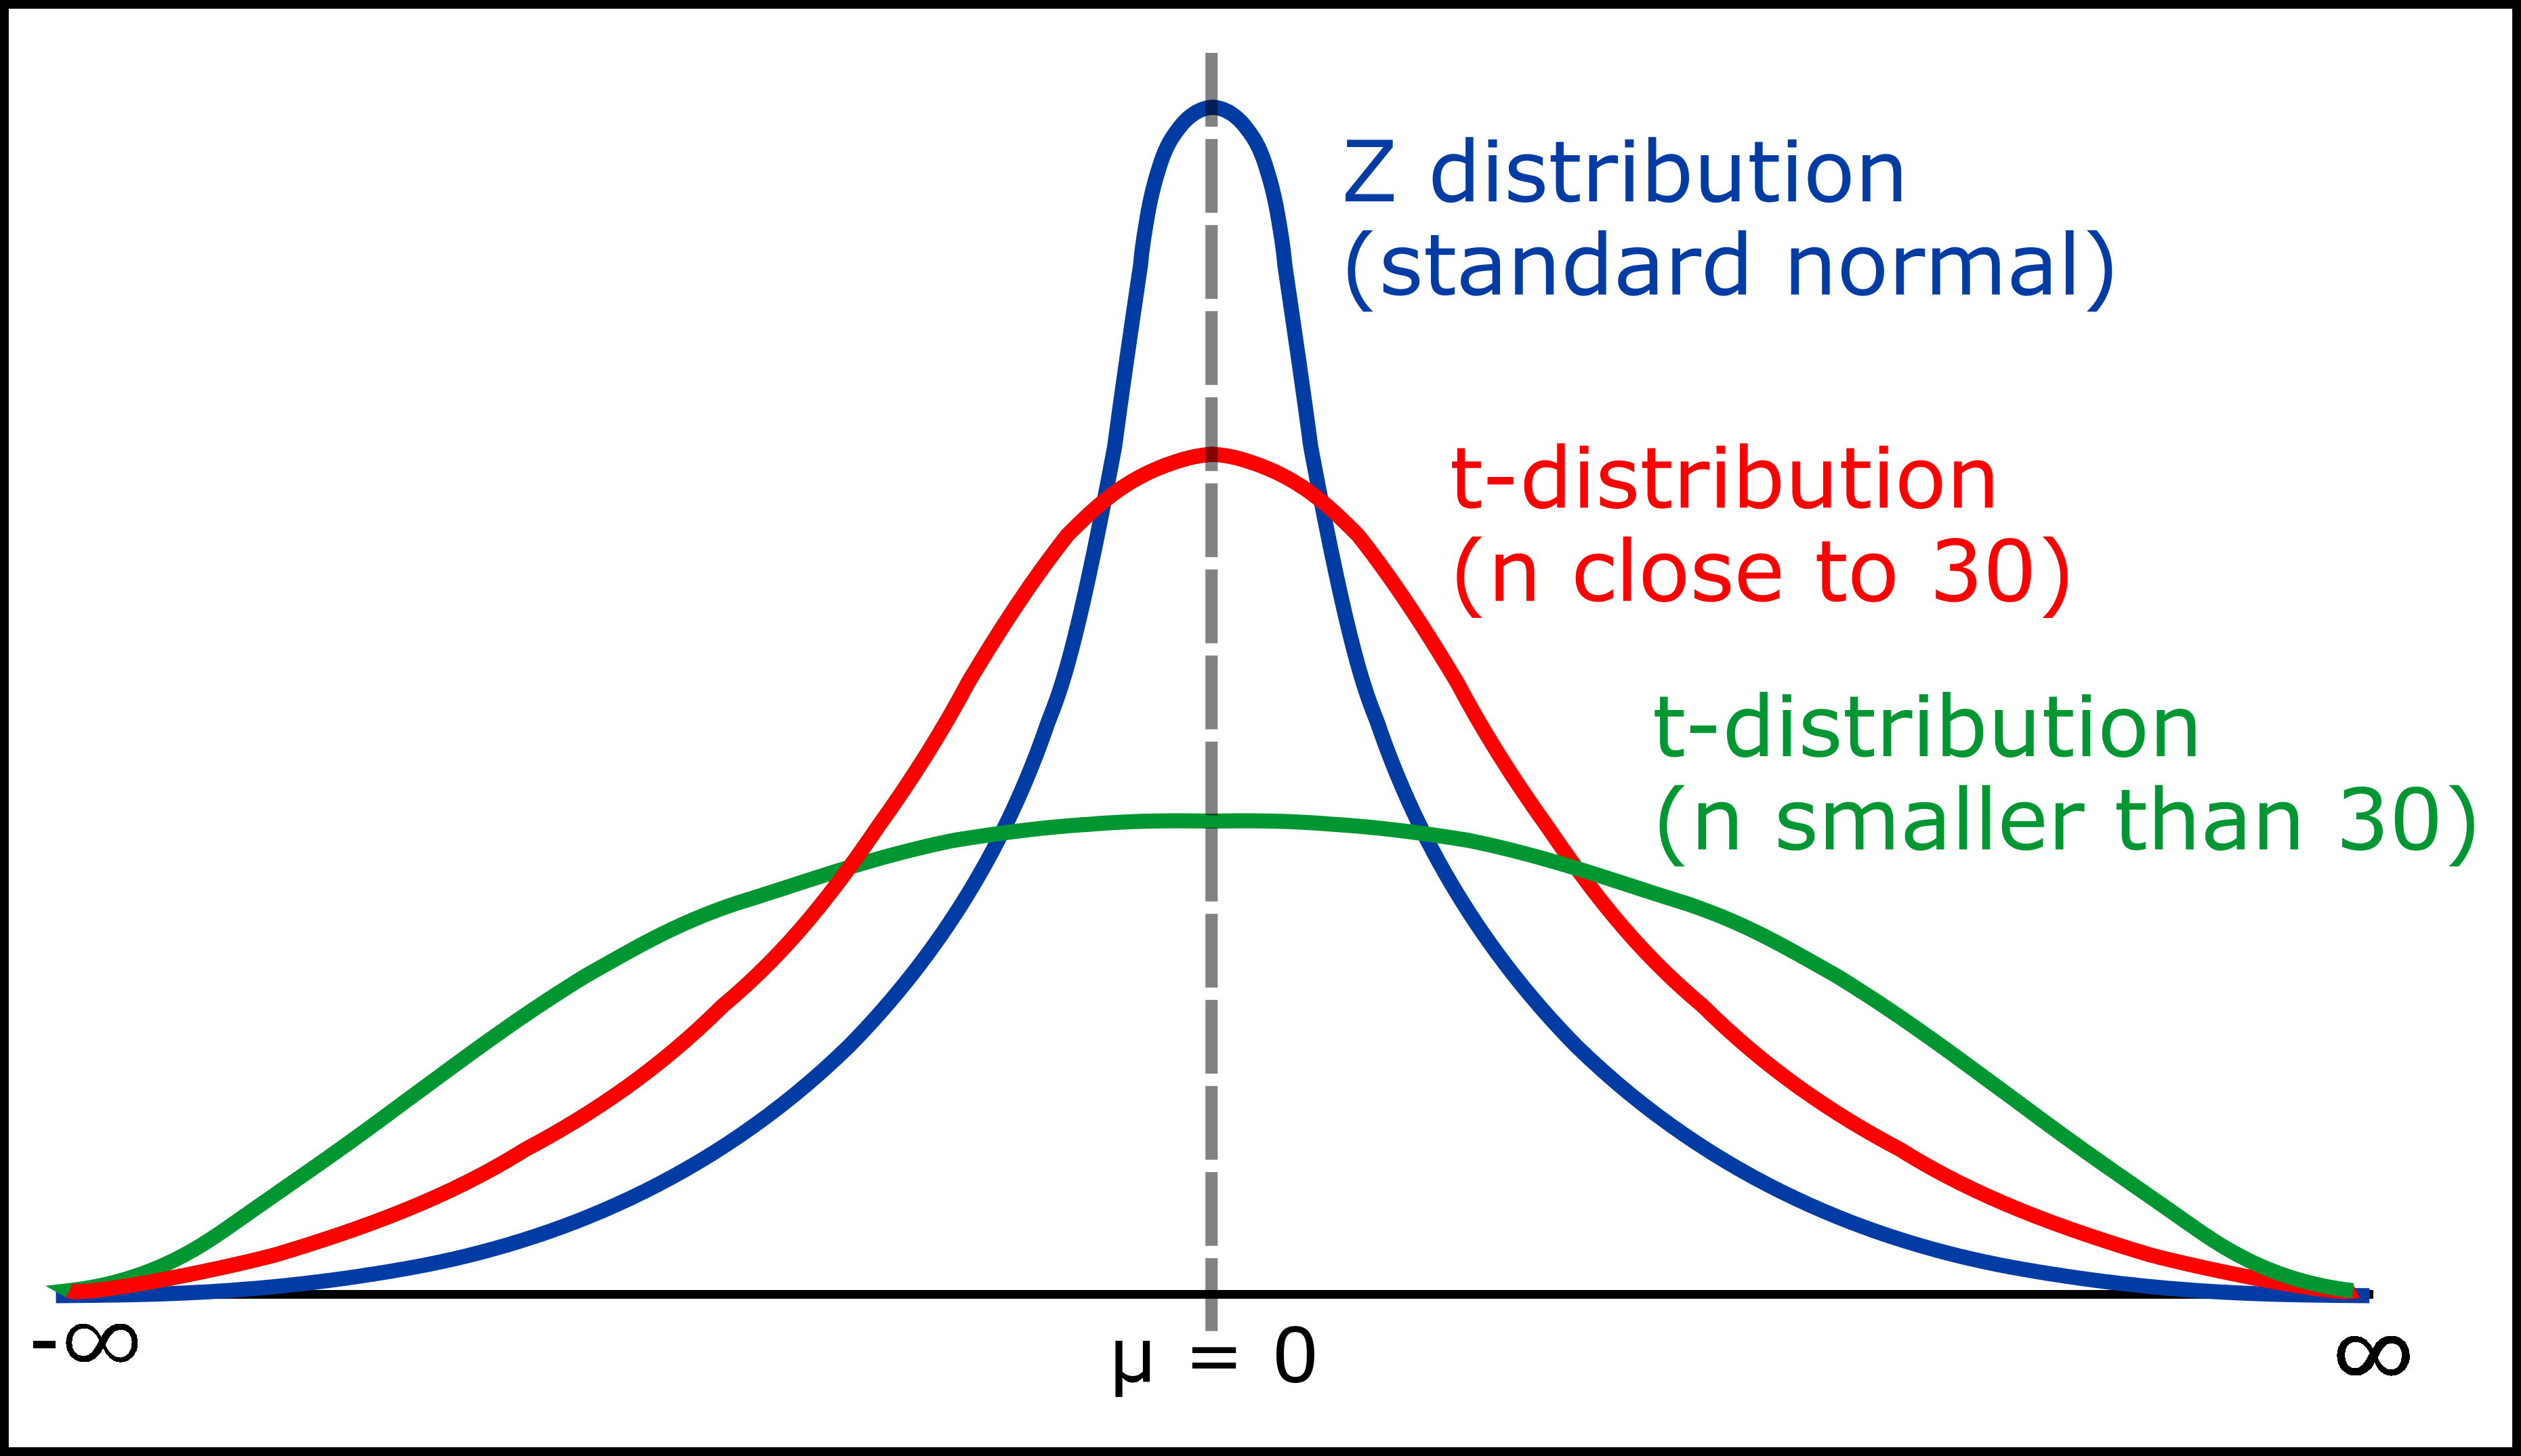 Students-t-distribution